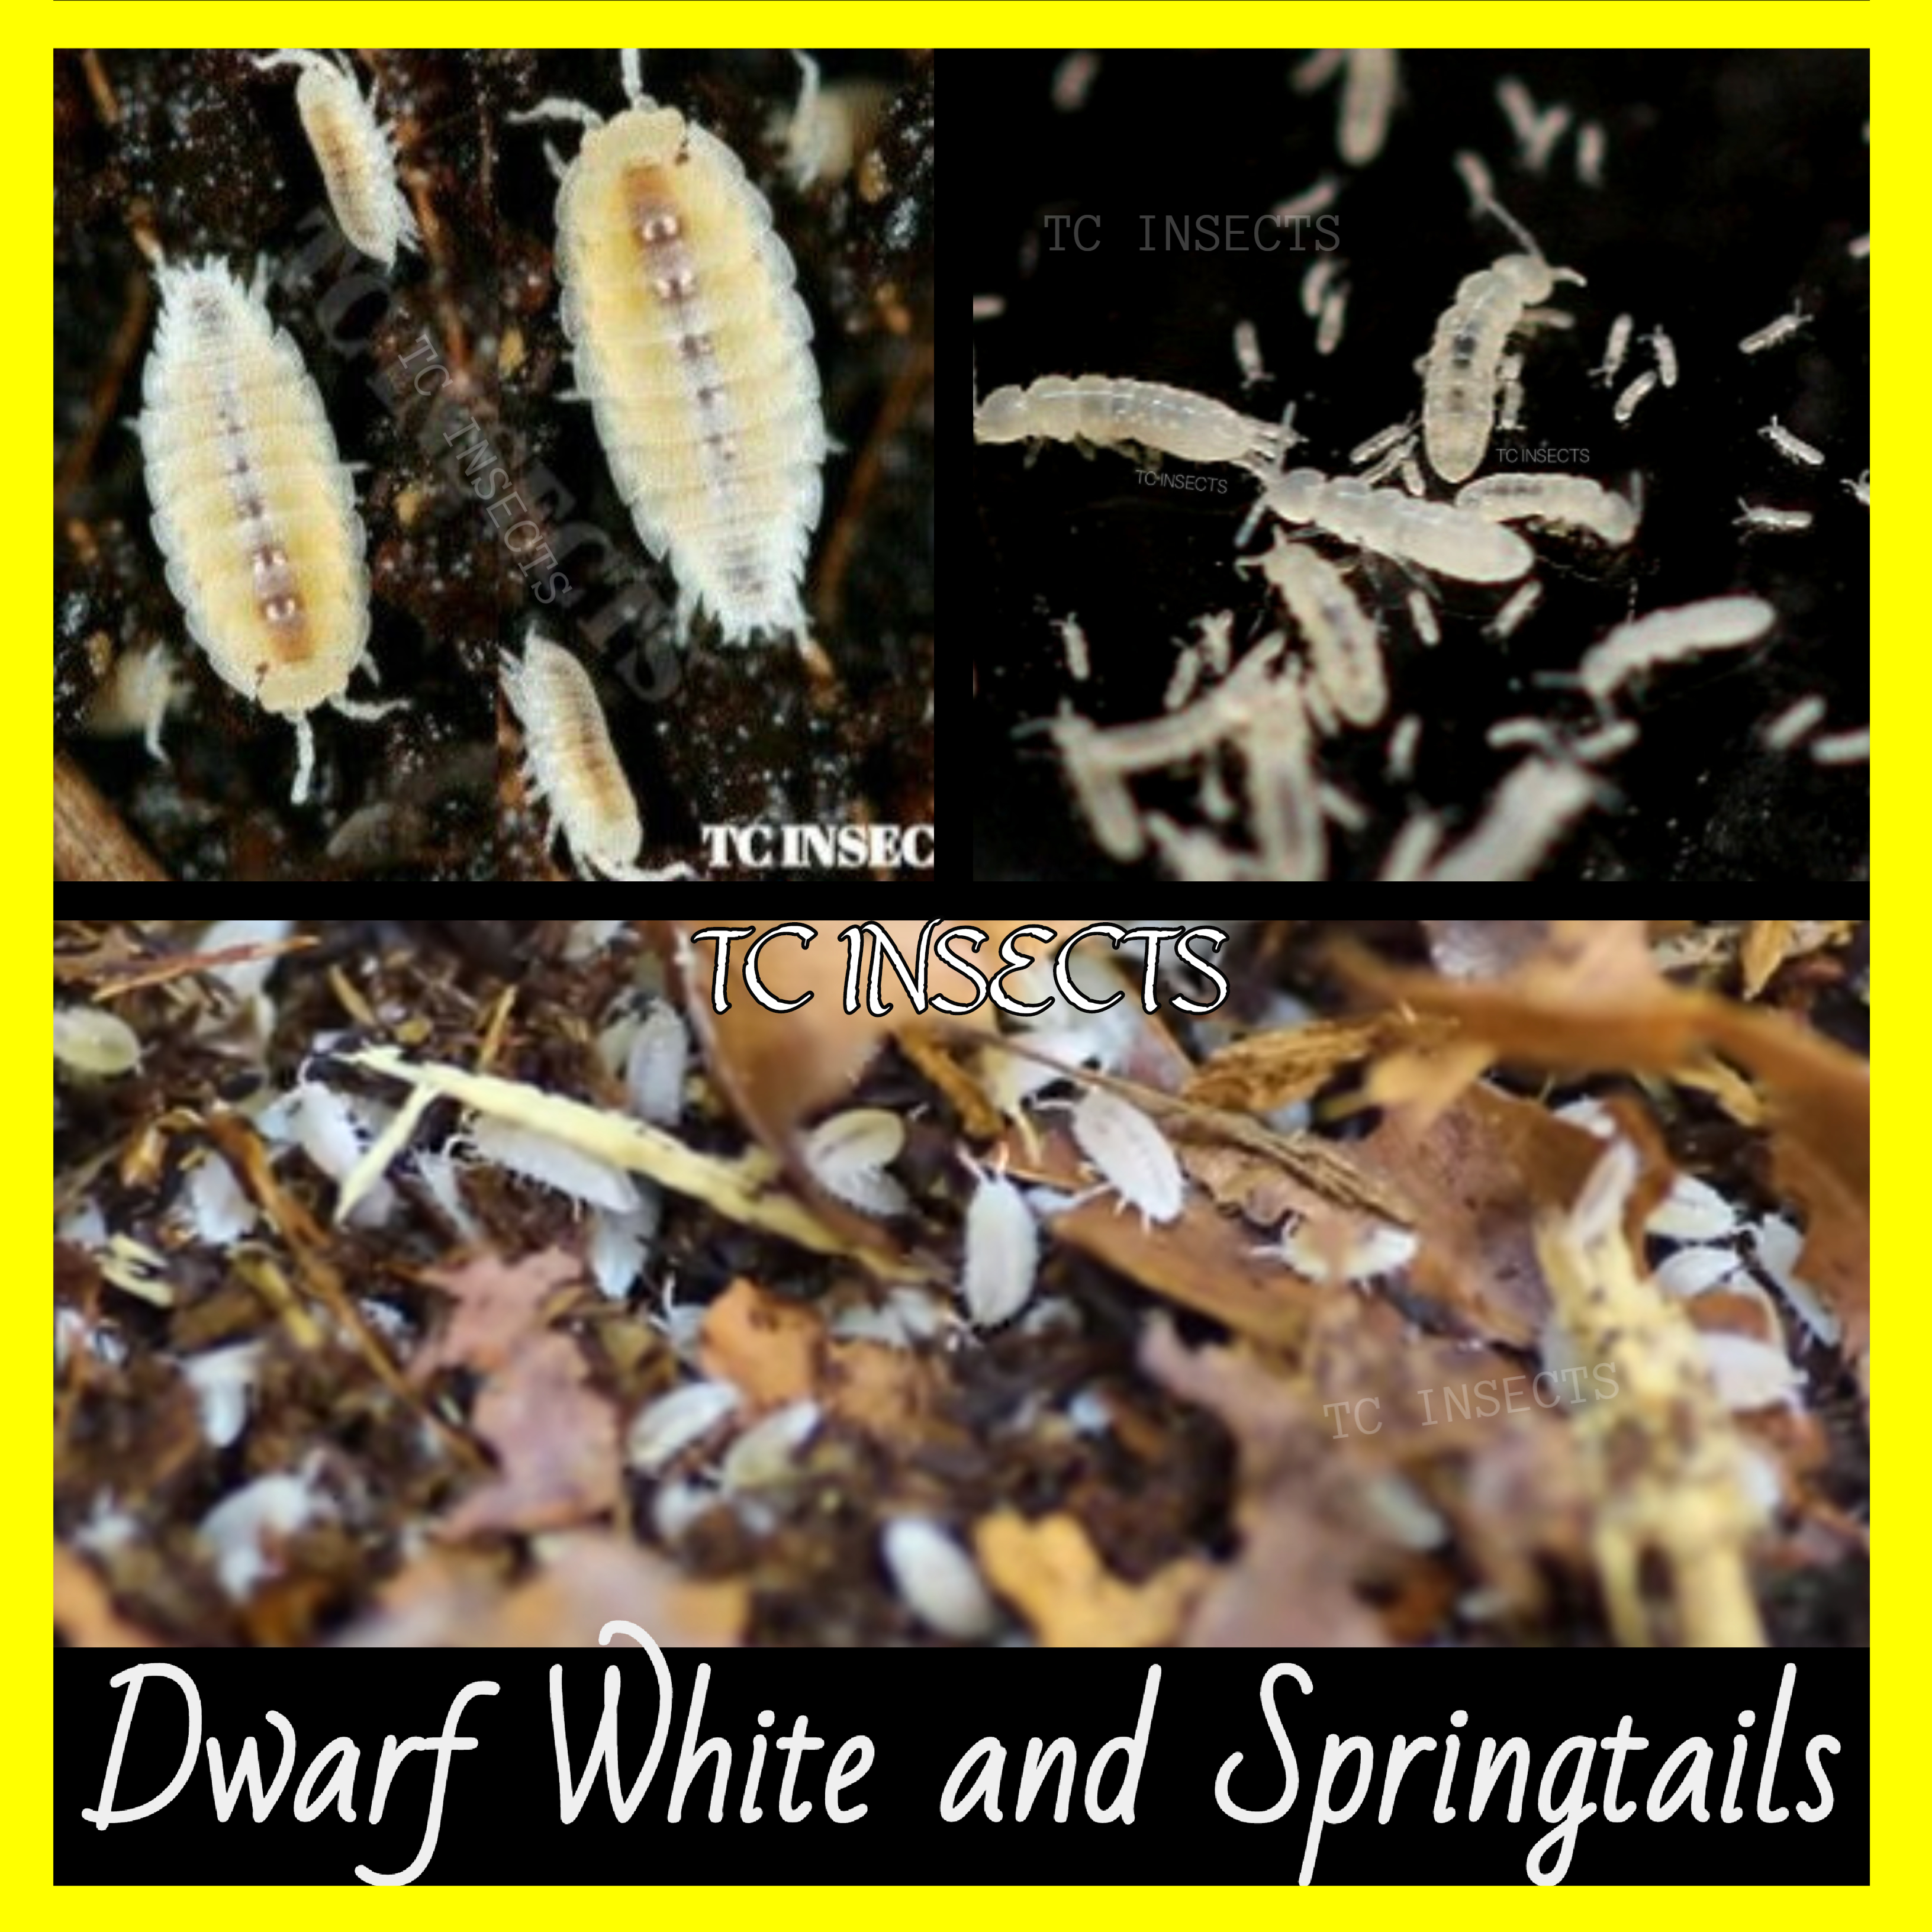 https://www.tcinsects.com/wp-content/uploads/2021/06/Dwarf-White-and-Springtails.jpg